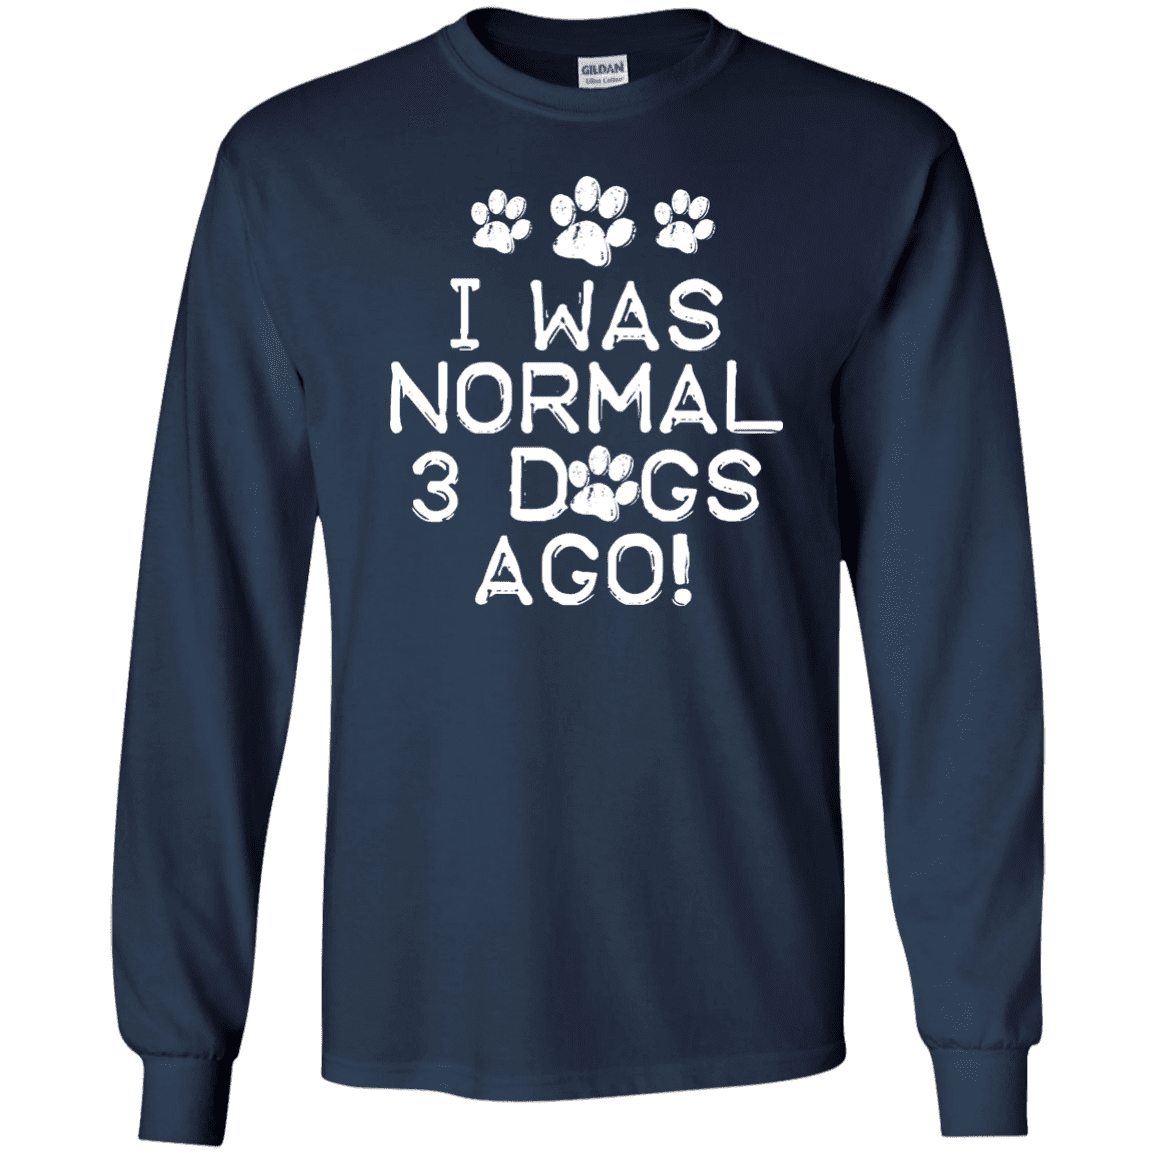 I Was Normal Dogs - Long Sleeve T Shirt.